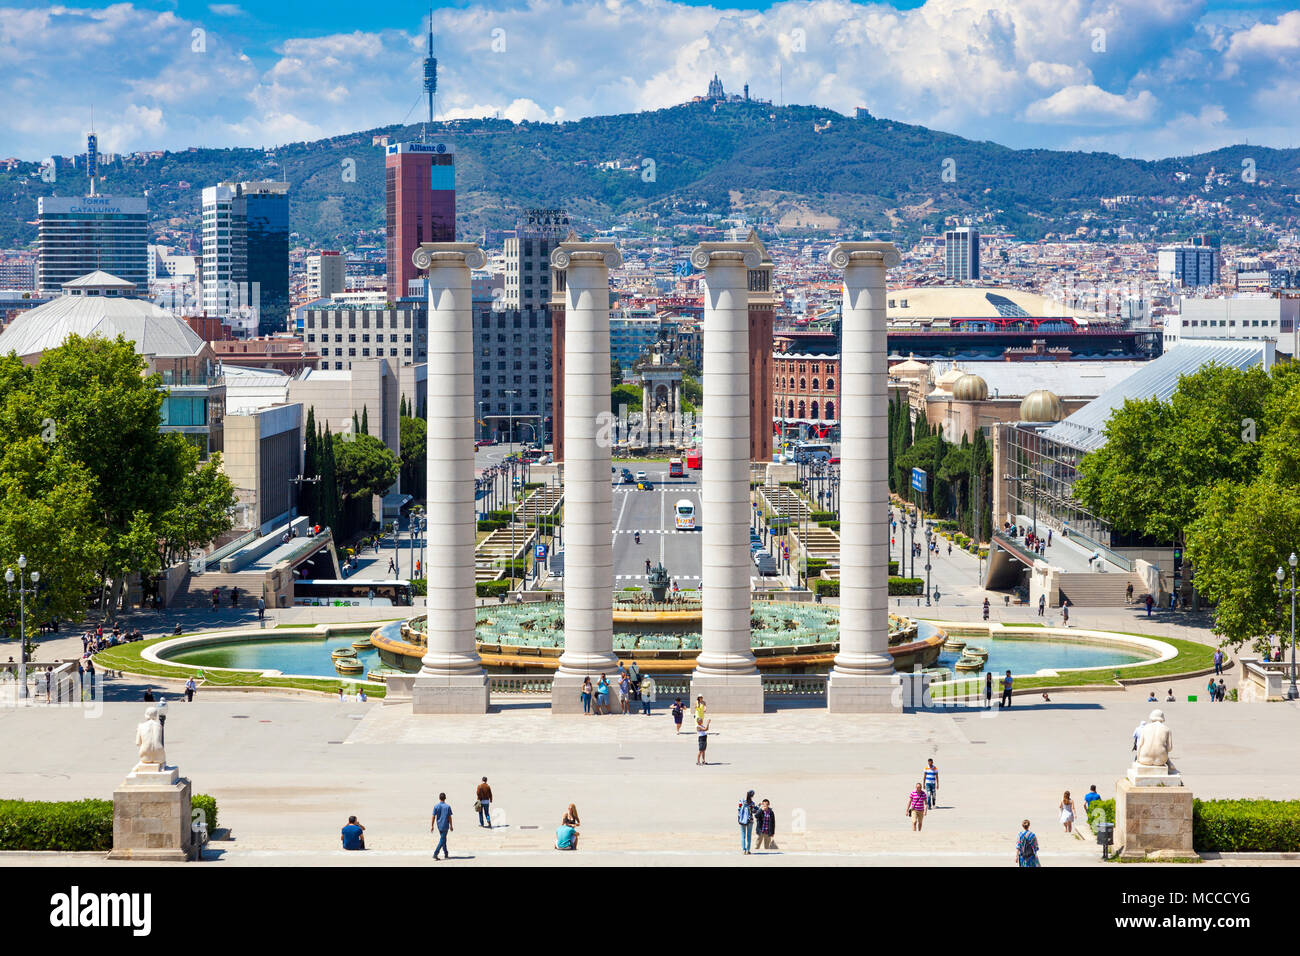 The Four Columns (Les Quatre Columnes), the Magic Fountain and view of the city from the Montjuic hill, Barcelona, Spain Stock Photo